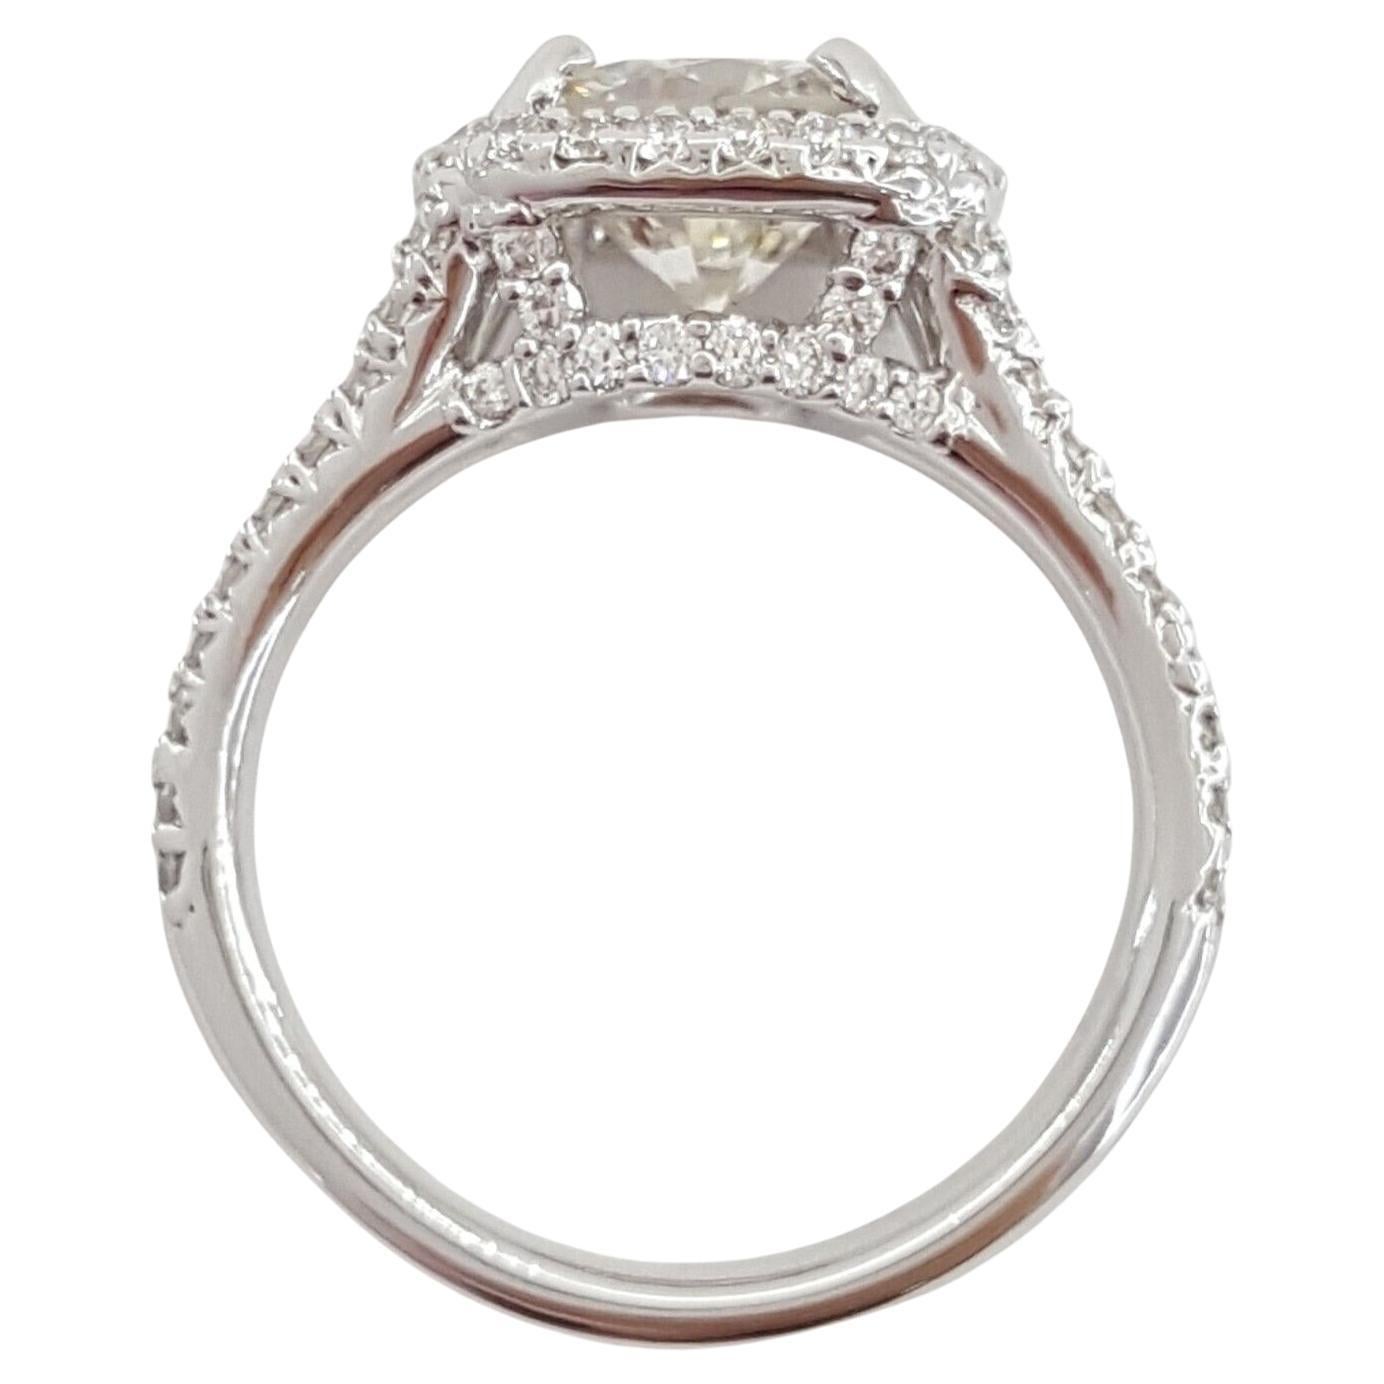 Introducing a remarkable 2.63-carat Total Weight Round Brilliant Cut Diamond Halo Split Shank Engagement Ring, elegantly crafted in 18k White Gold.

This exquisite ring possesses a total weight of 5.2 grams and is designed in a size 4.75. The focal